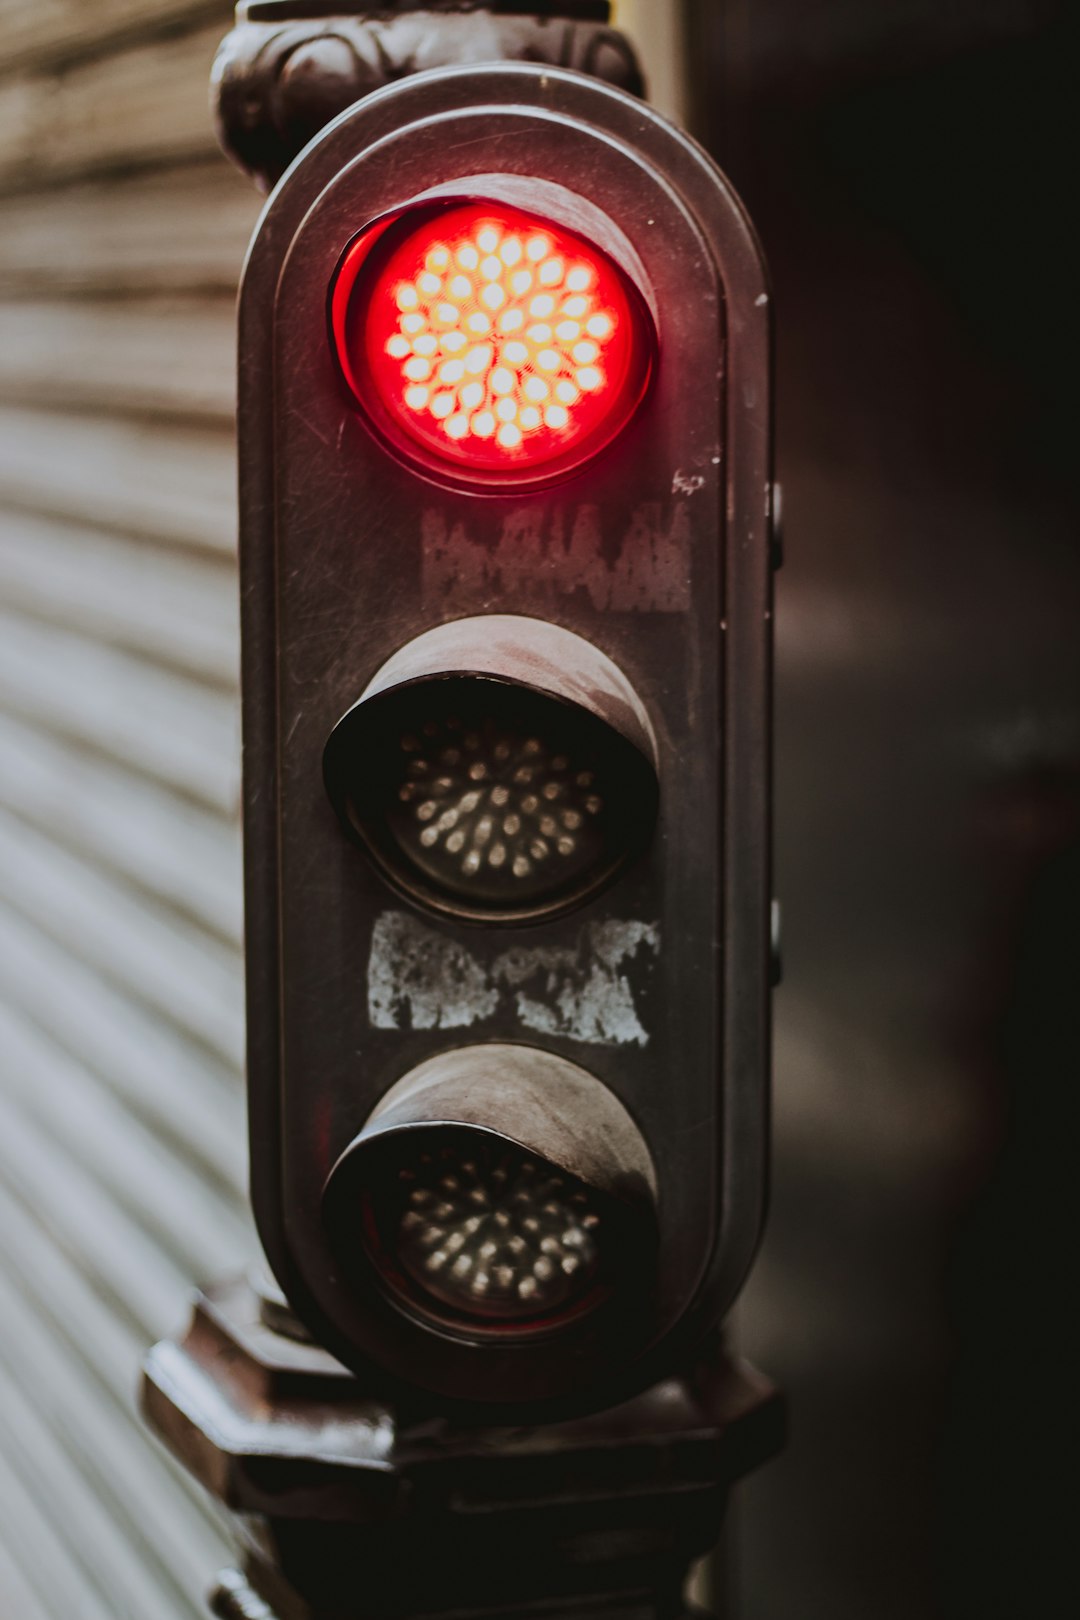 gray metal traffic light with red light